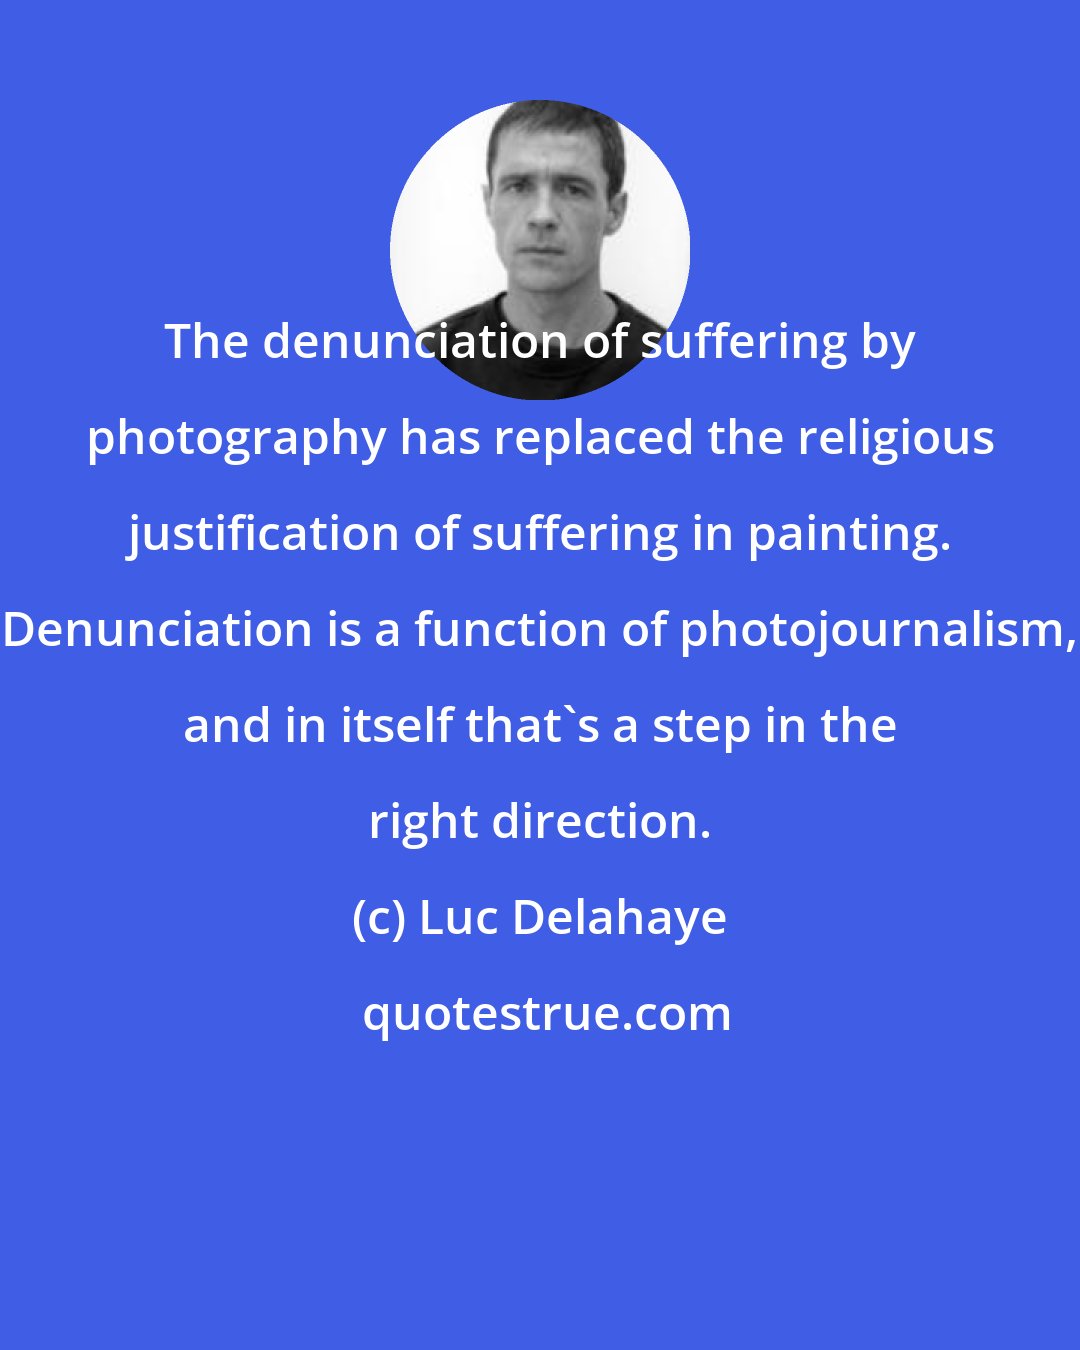 Luc Delahaye: The denunciation of suffering by photography has replaced the religious justification of suffering in painting. Denunciation is a function of photojournalism, and in itself that's a step in the right direction.